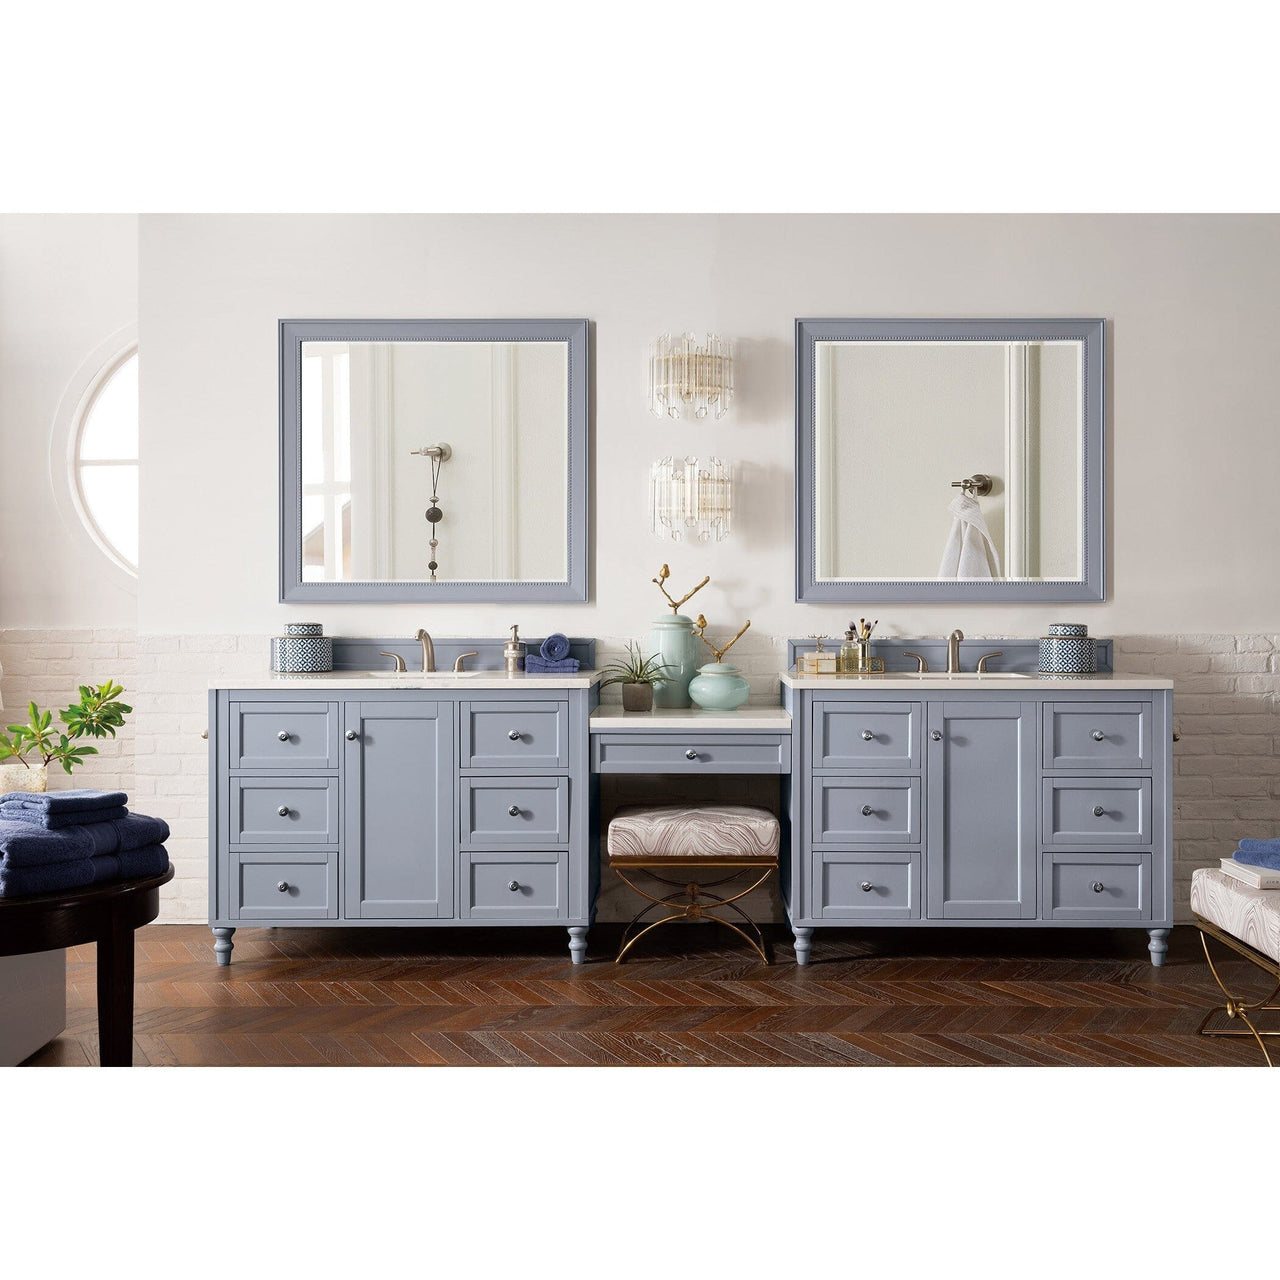 James Martin Copper Cove Encore 122" Double Vanity Set Vanity James Martin Silver Gray w/ 3 CM Arctic Fall Solid Surface Top 